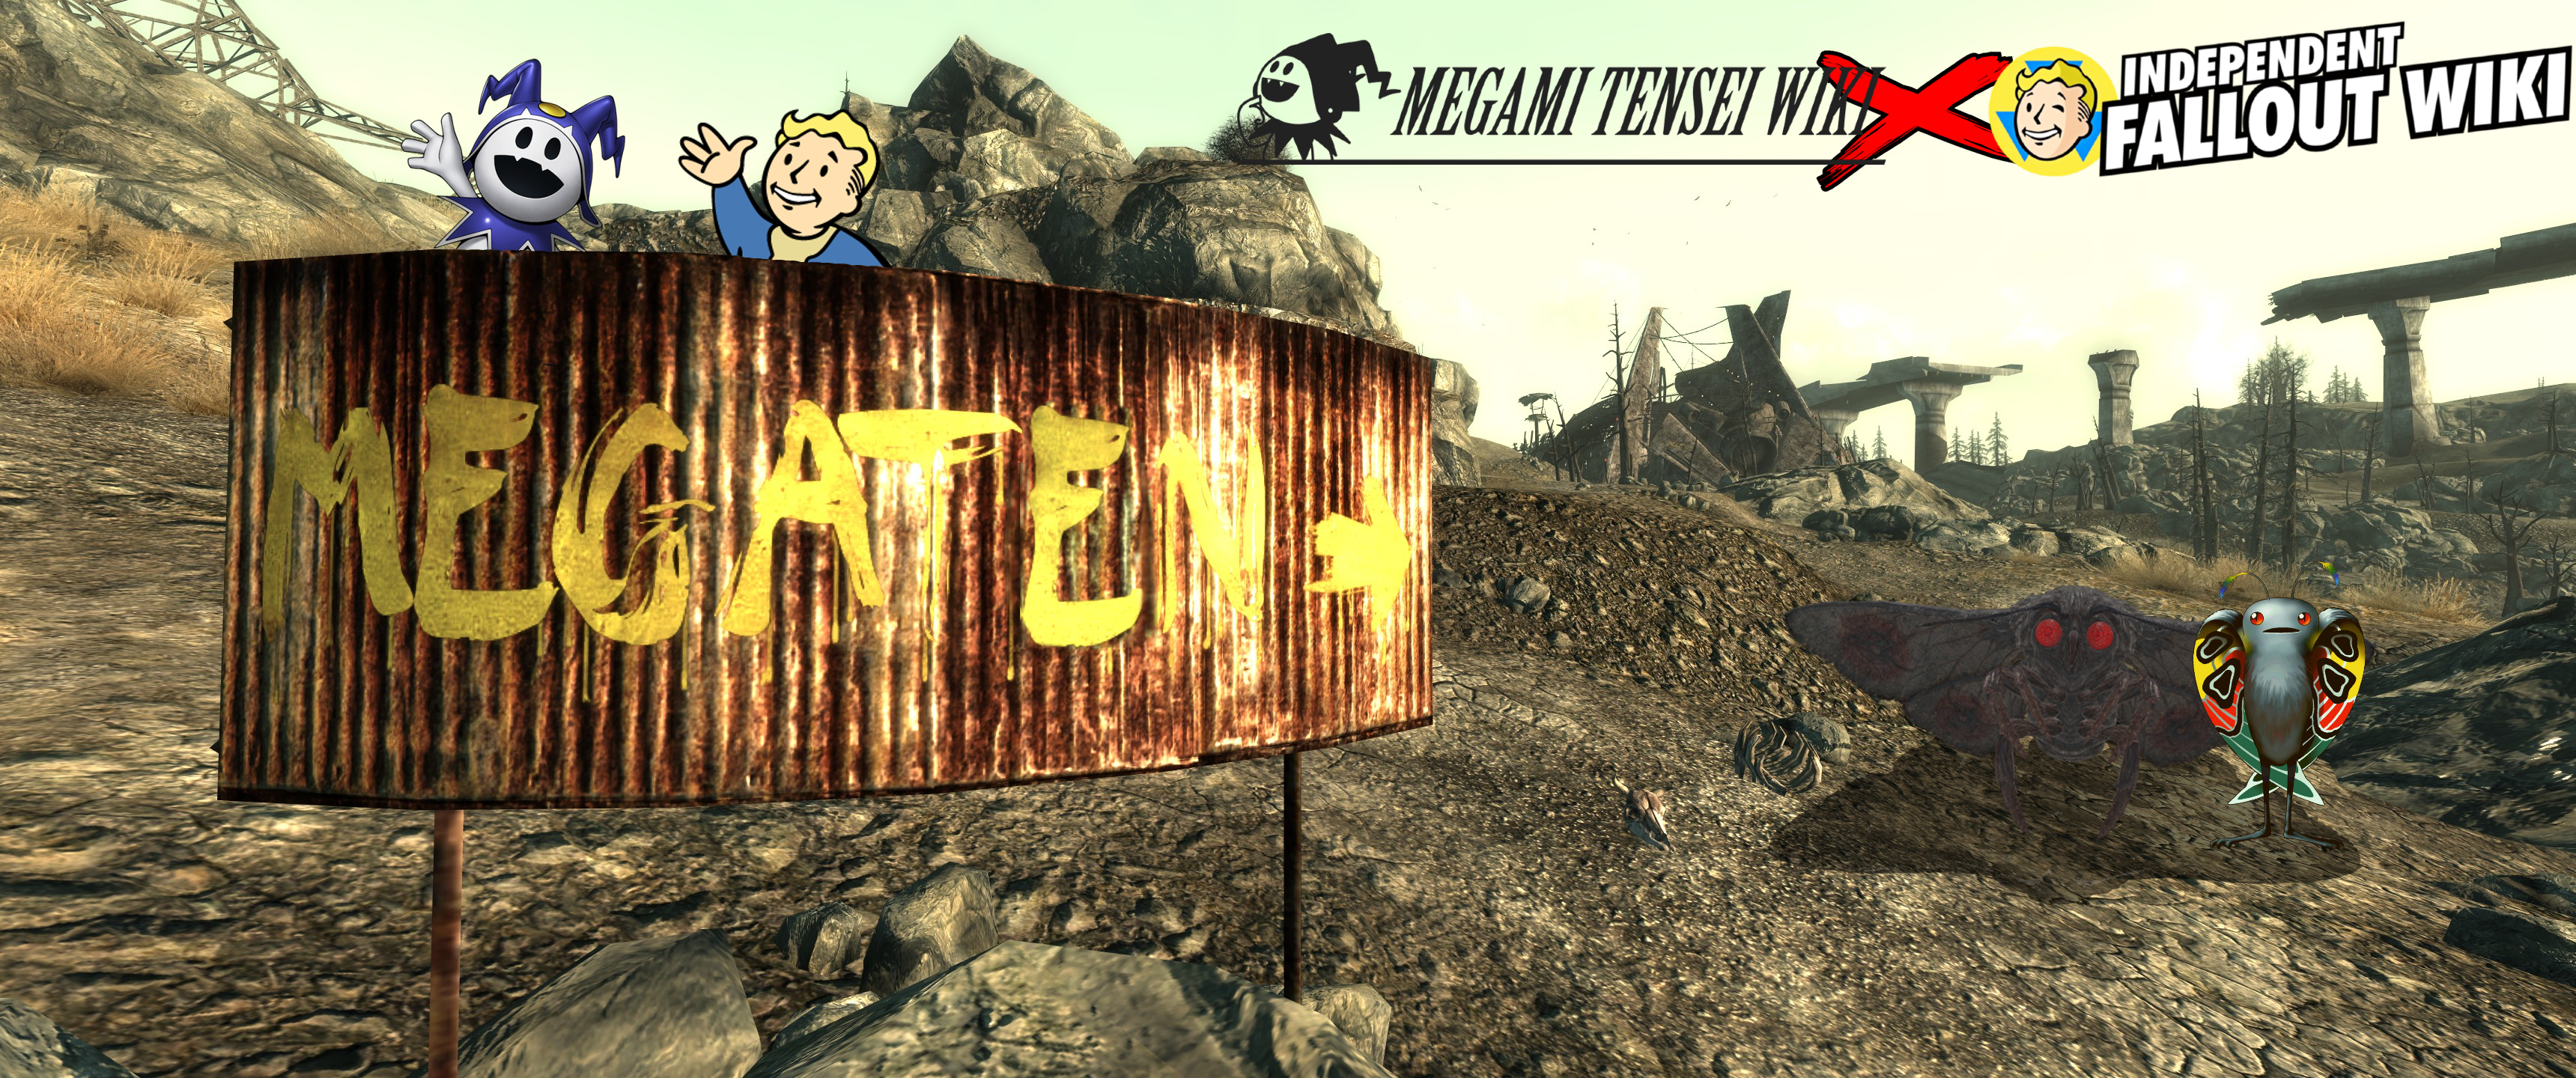 Fallout 3 - Independent Fallout Wiki